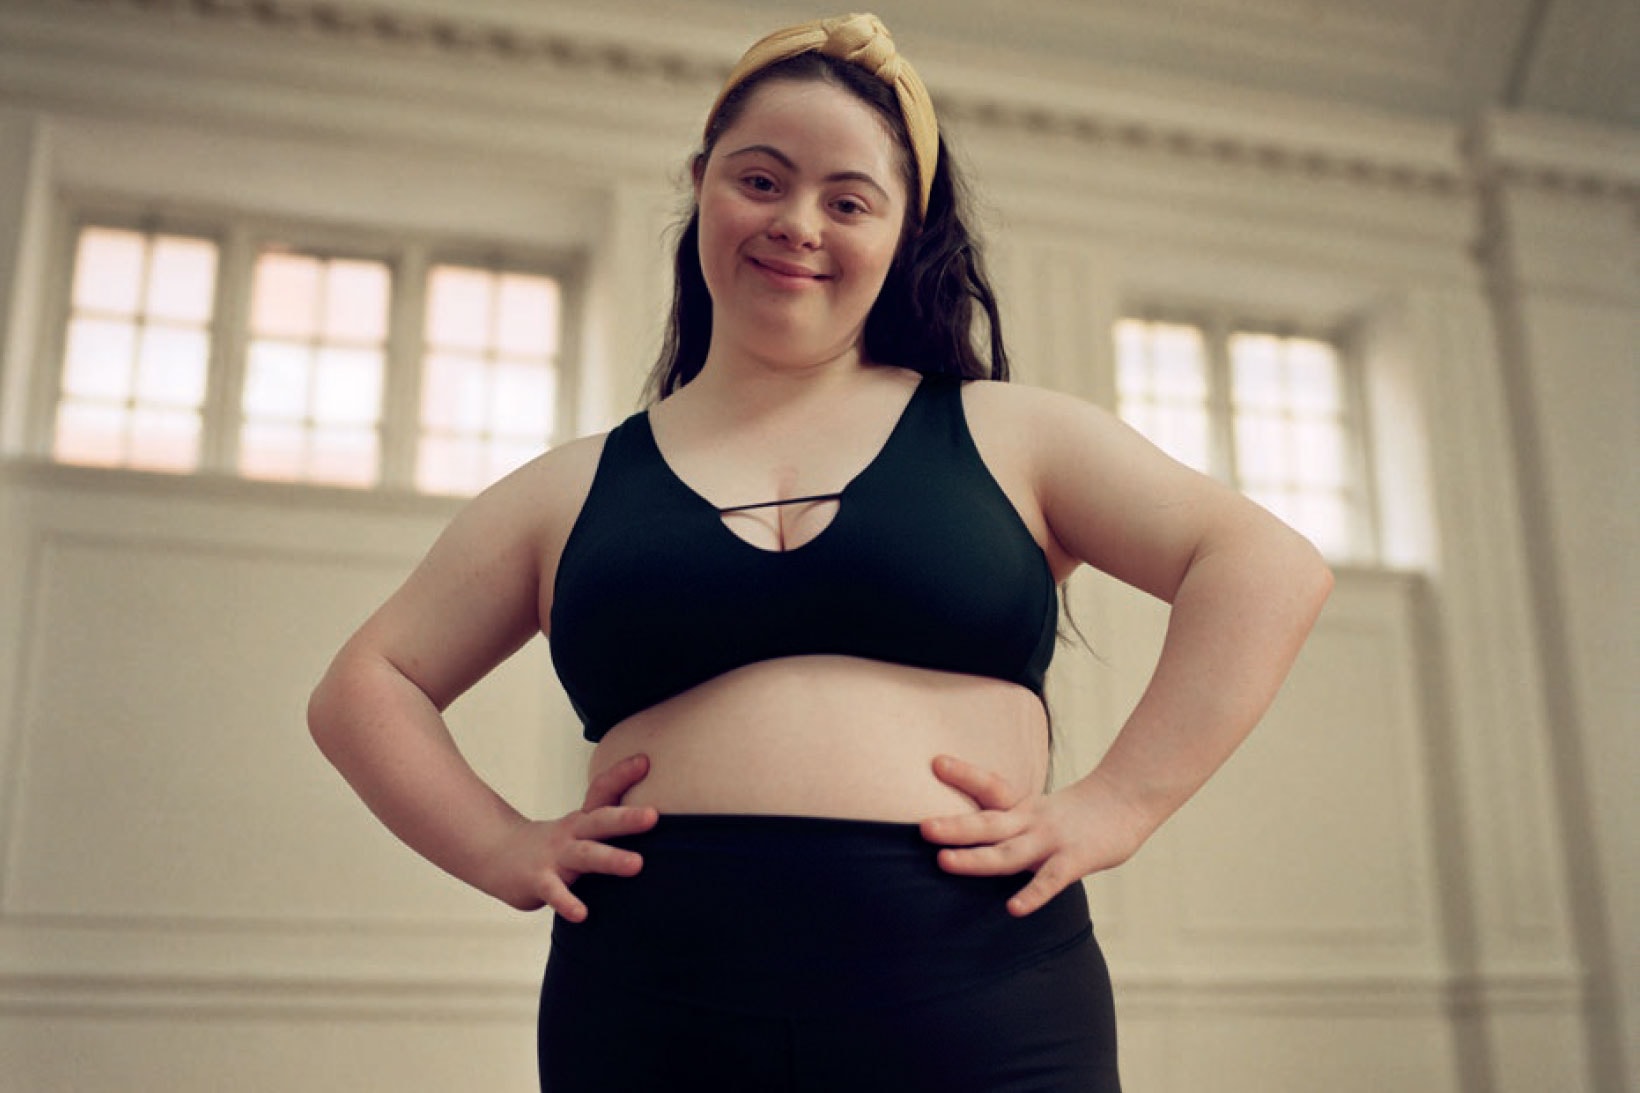 Adidas debuts expansive and size-inclusive line of sports bras